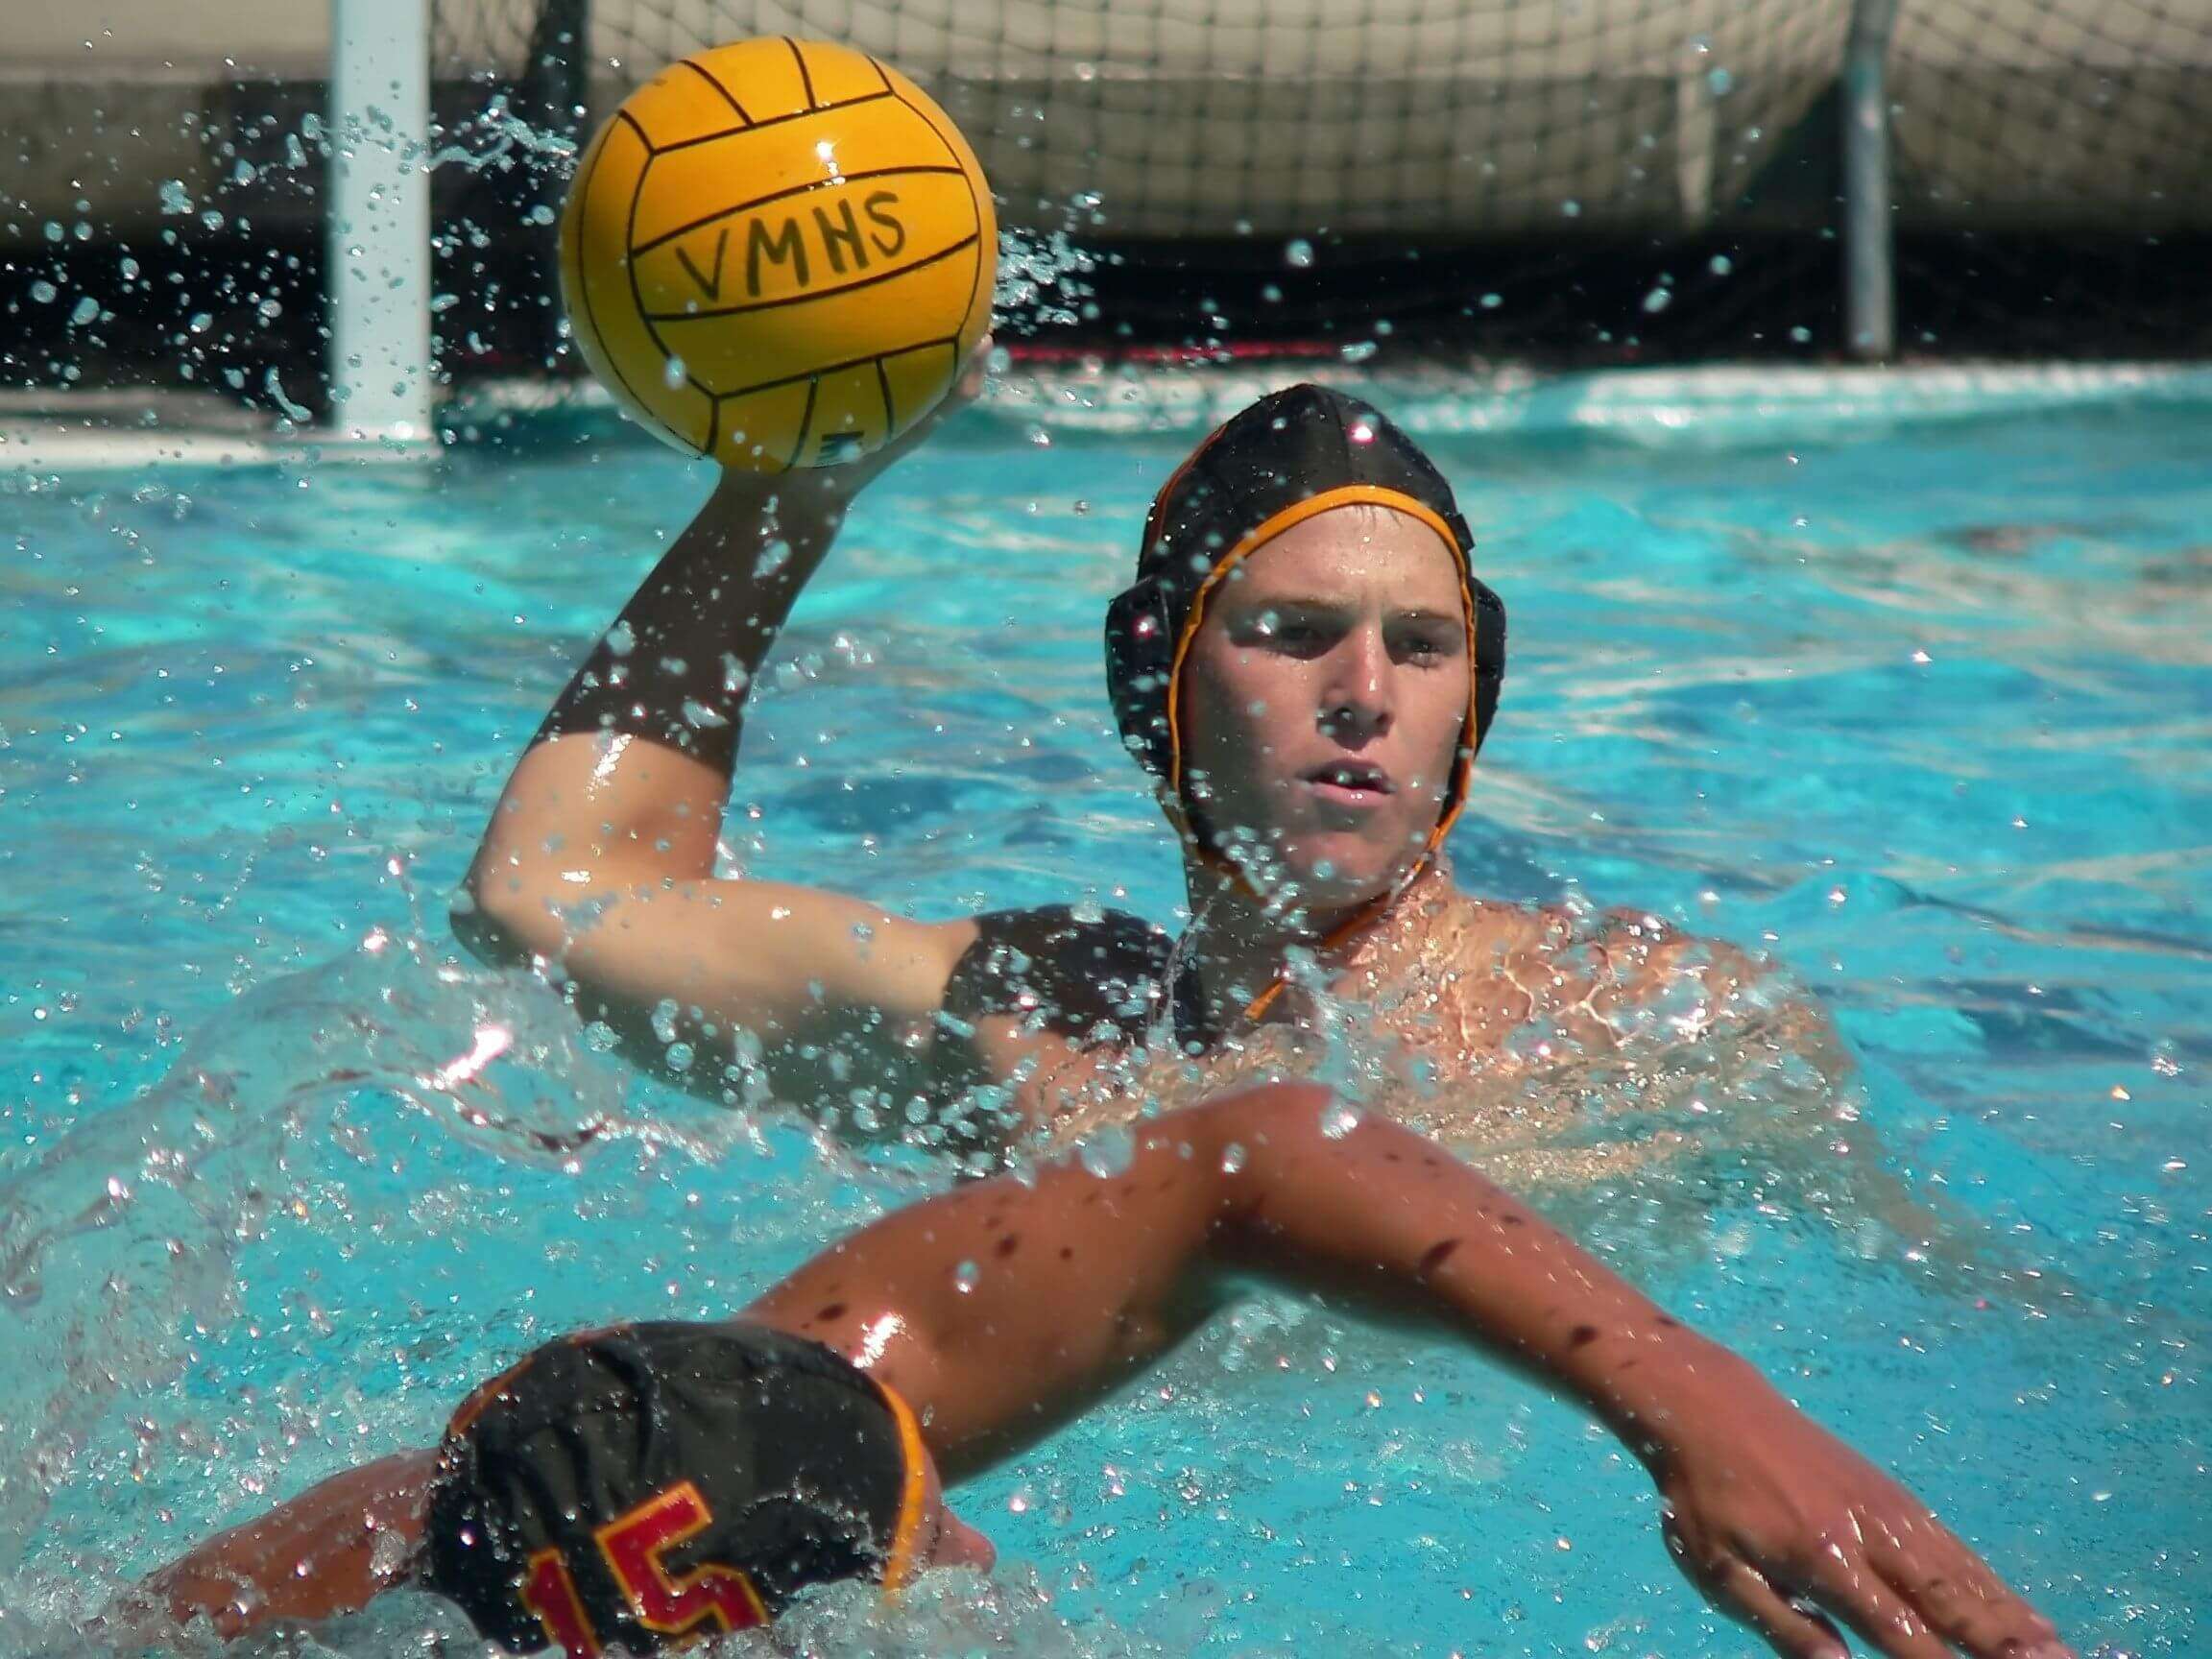 WATER POLO